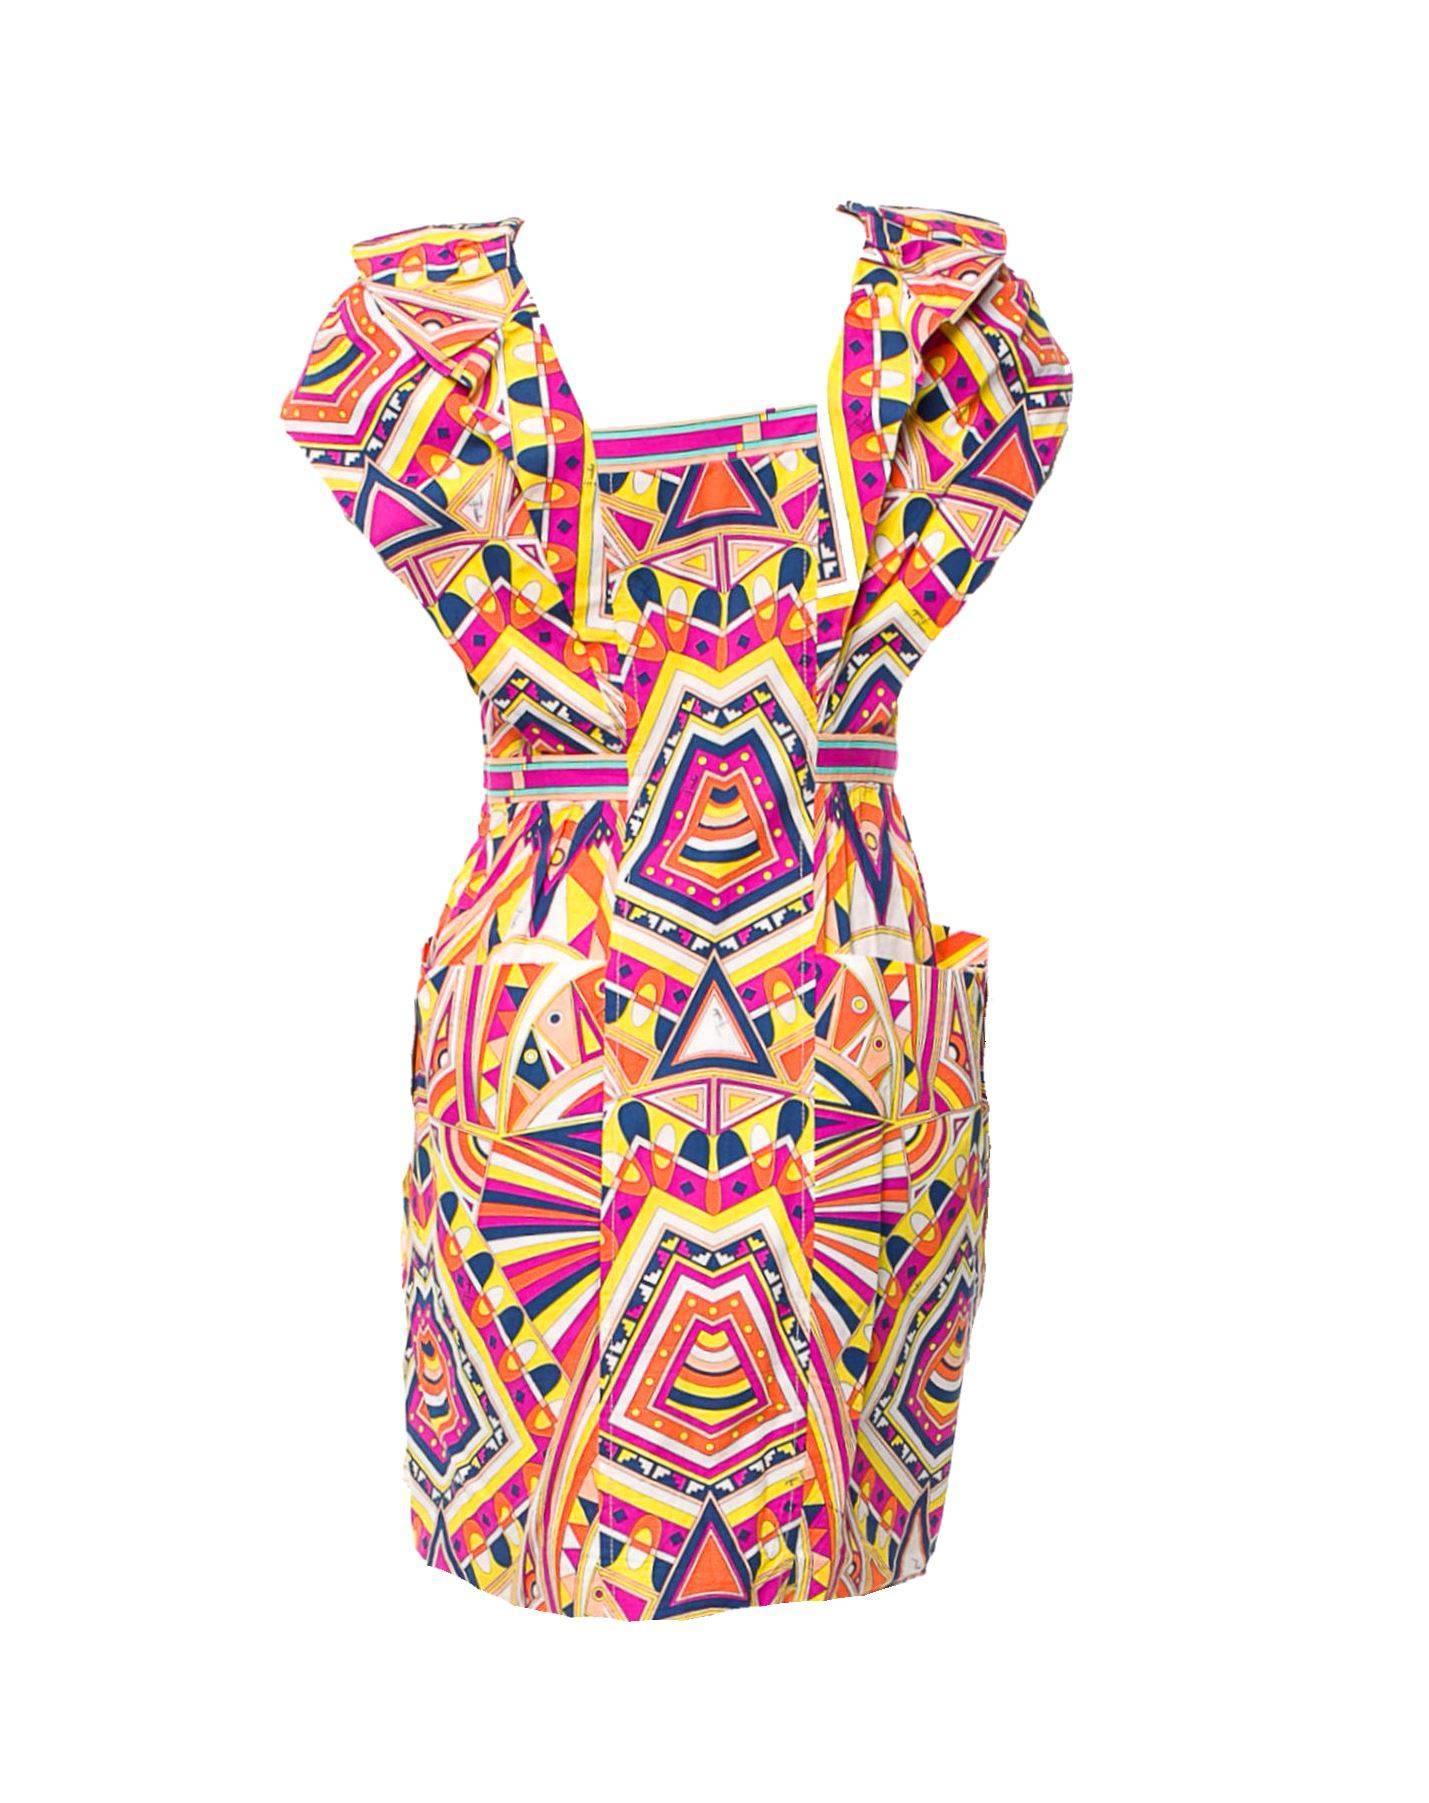 Classy Emilio Pucci Dress
Beautiful multicolor Kaleidoscope print
Discreetly signed with 